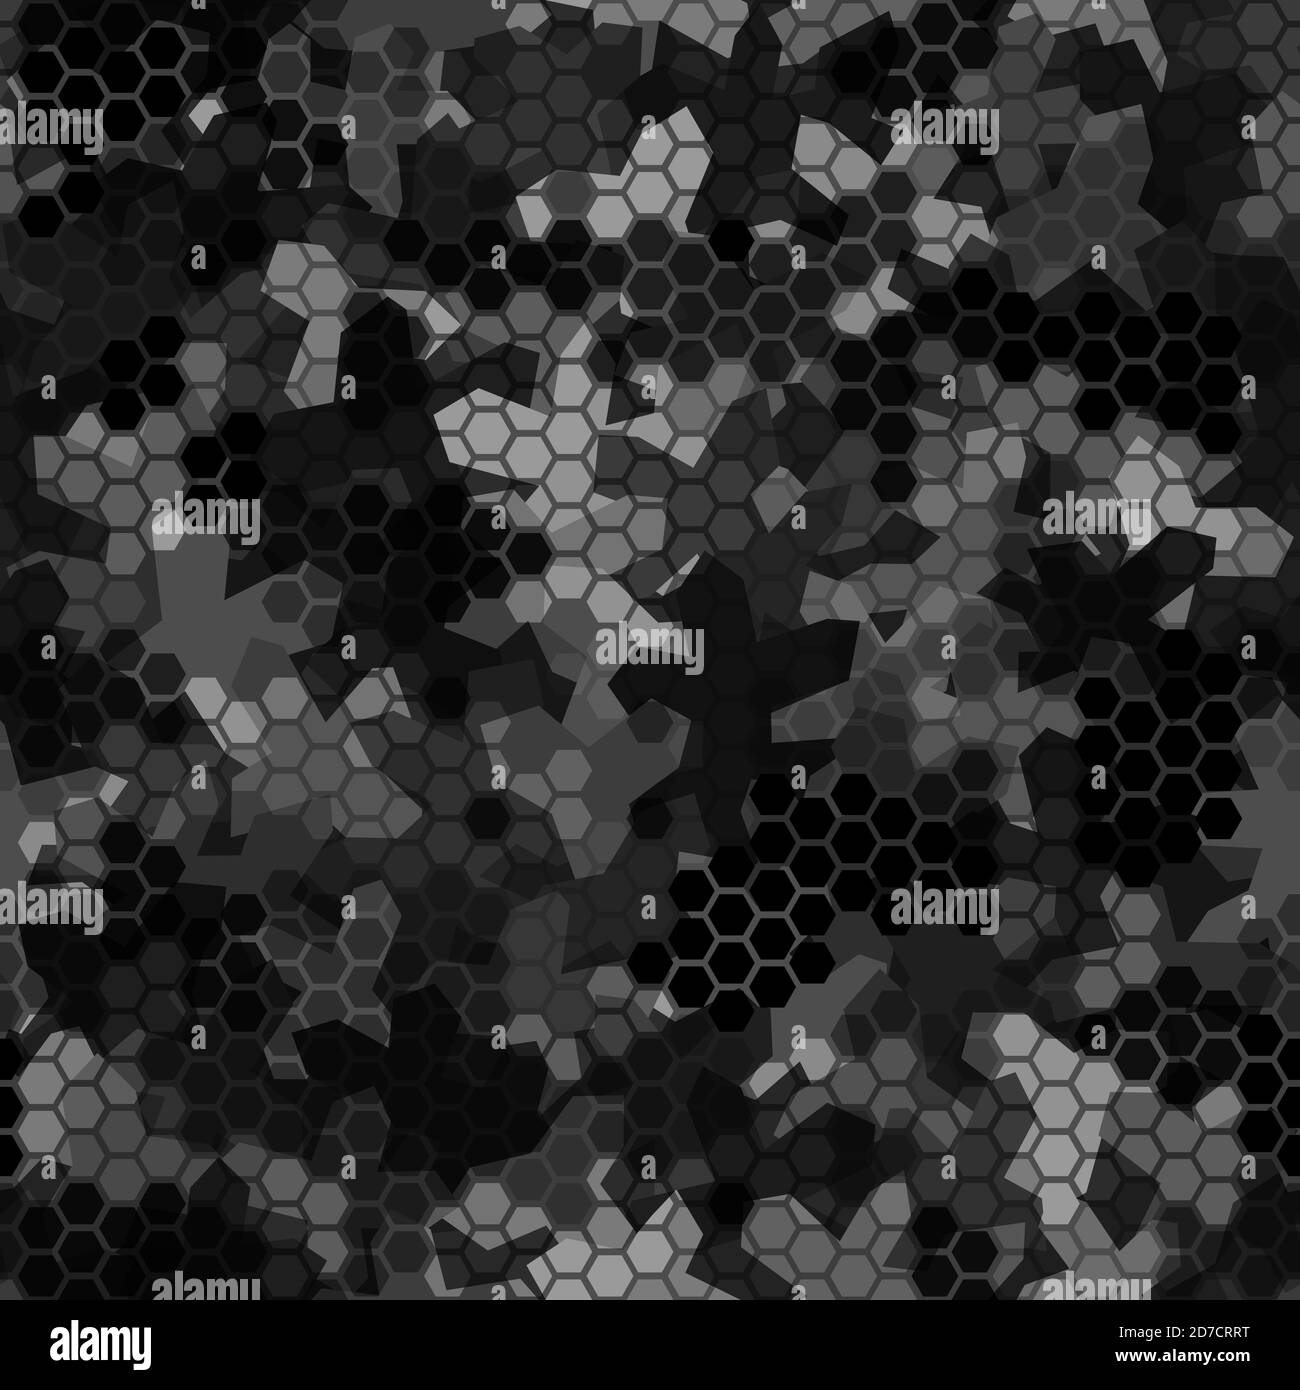 Army camouflage vector seamless pattern Black and White Stock